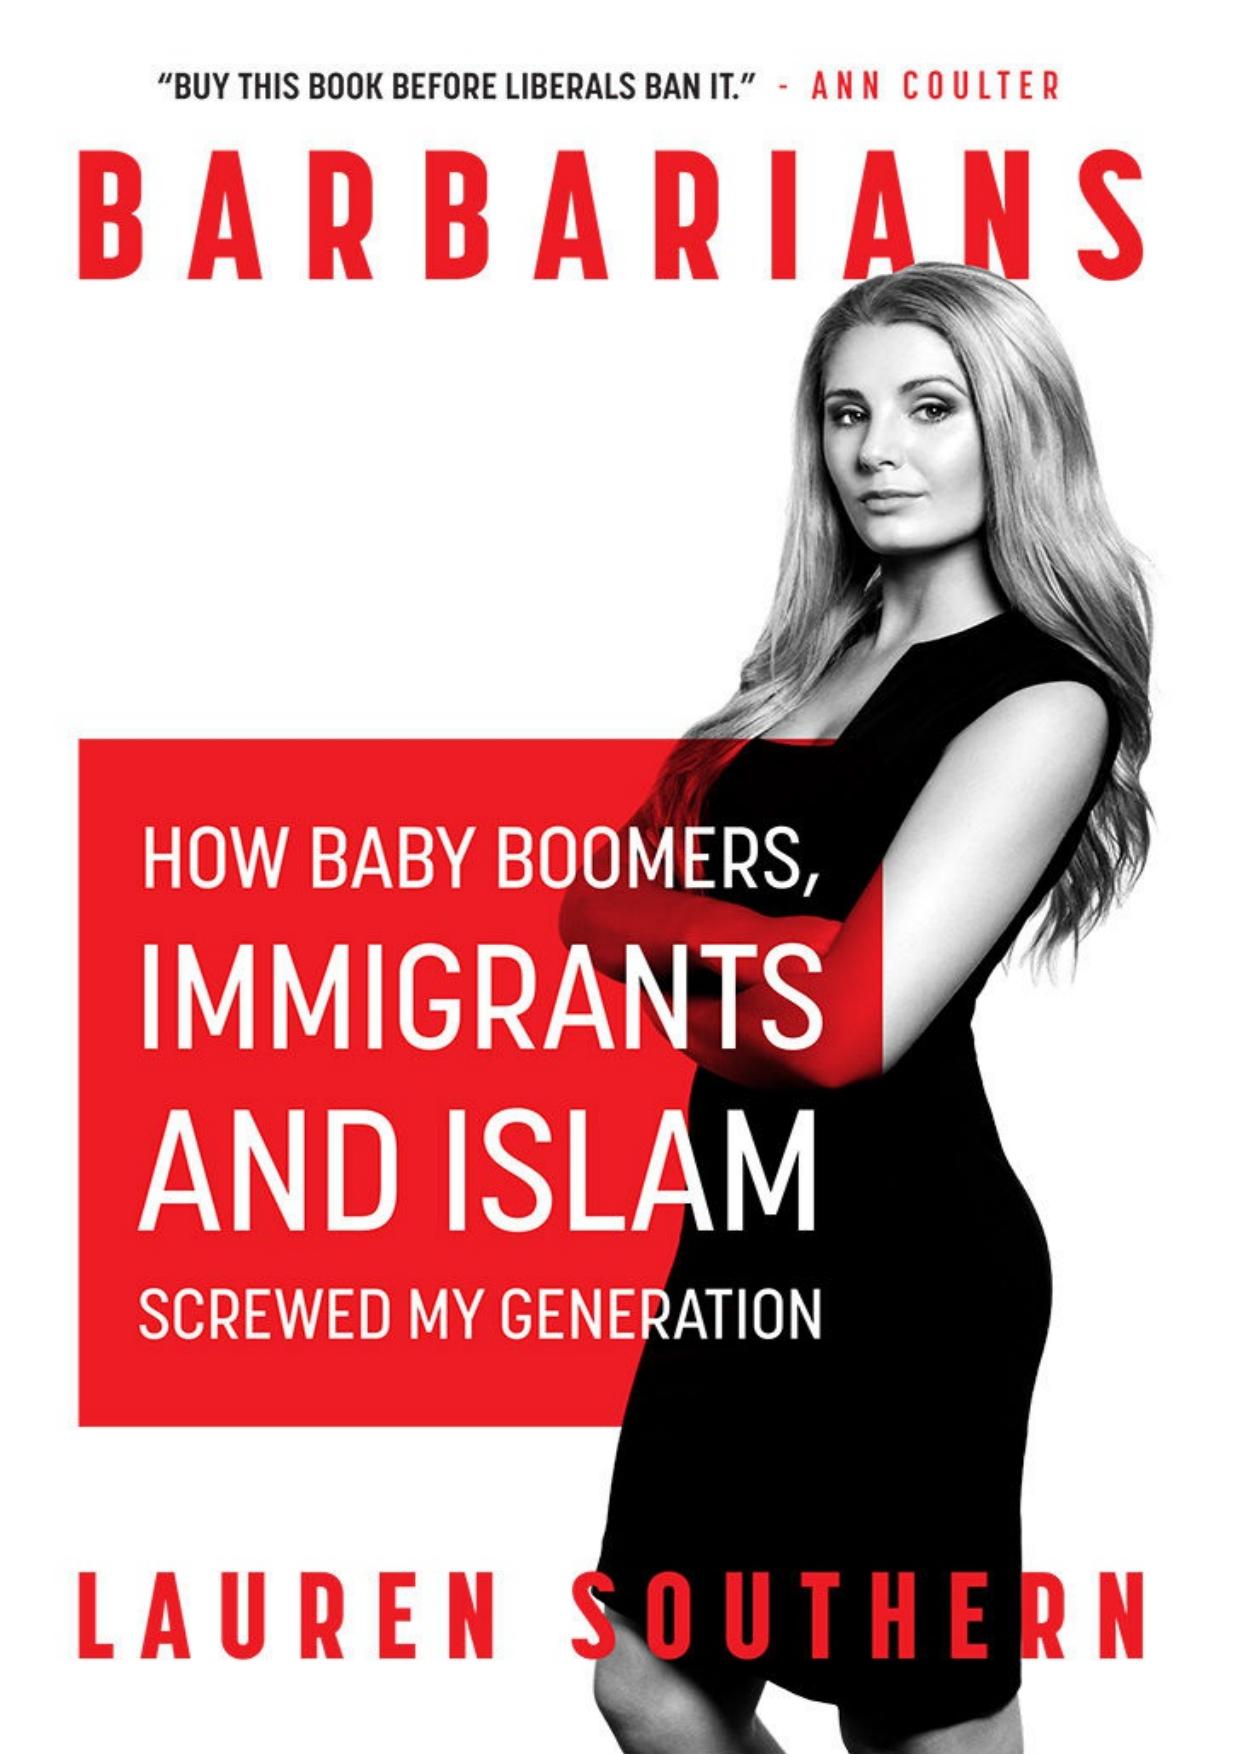 Barbarians: How Baby Boomers, Immigrants, and Islam Screwed My Generation